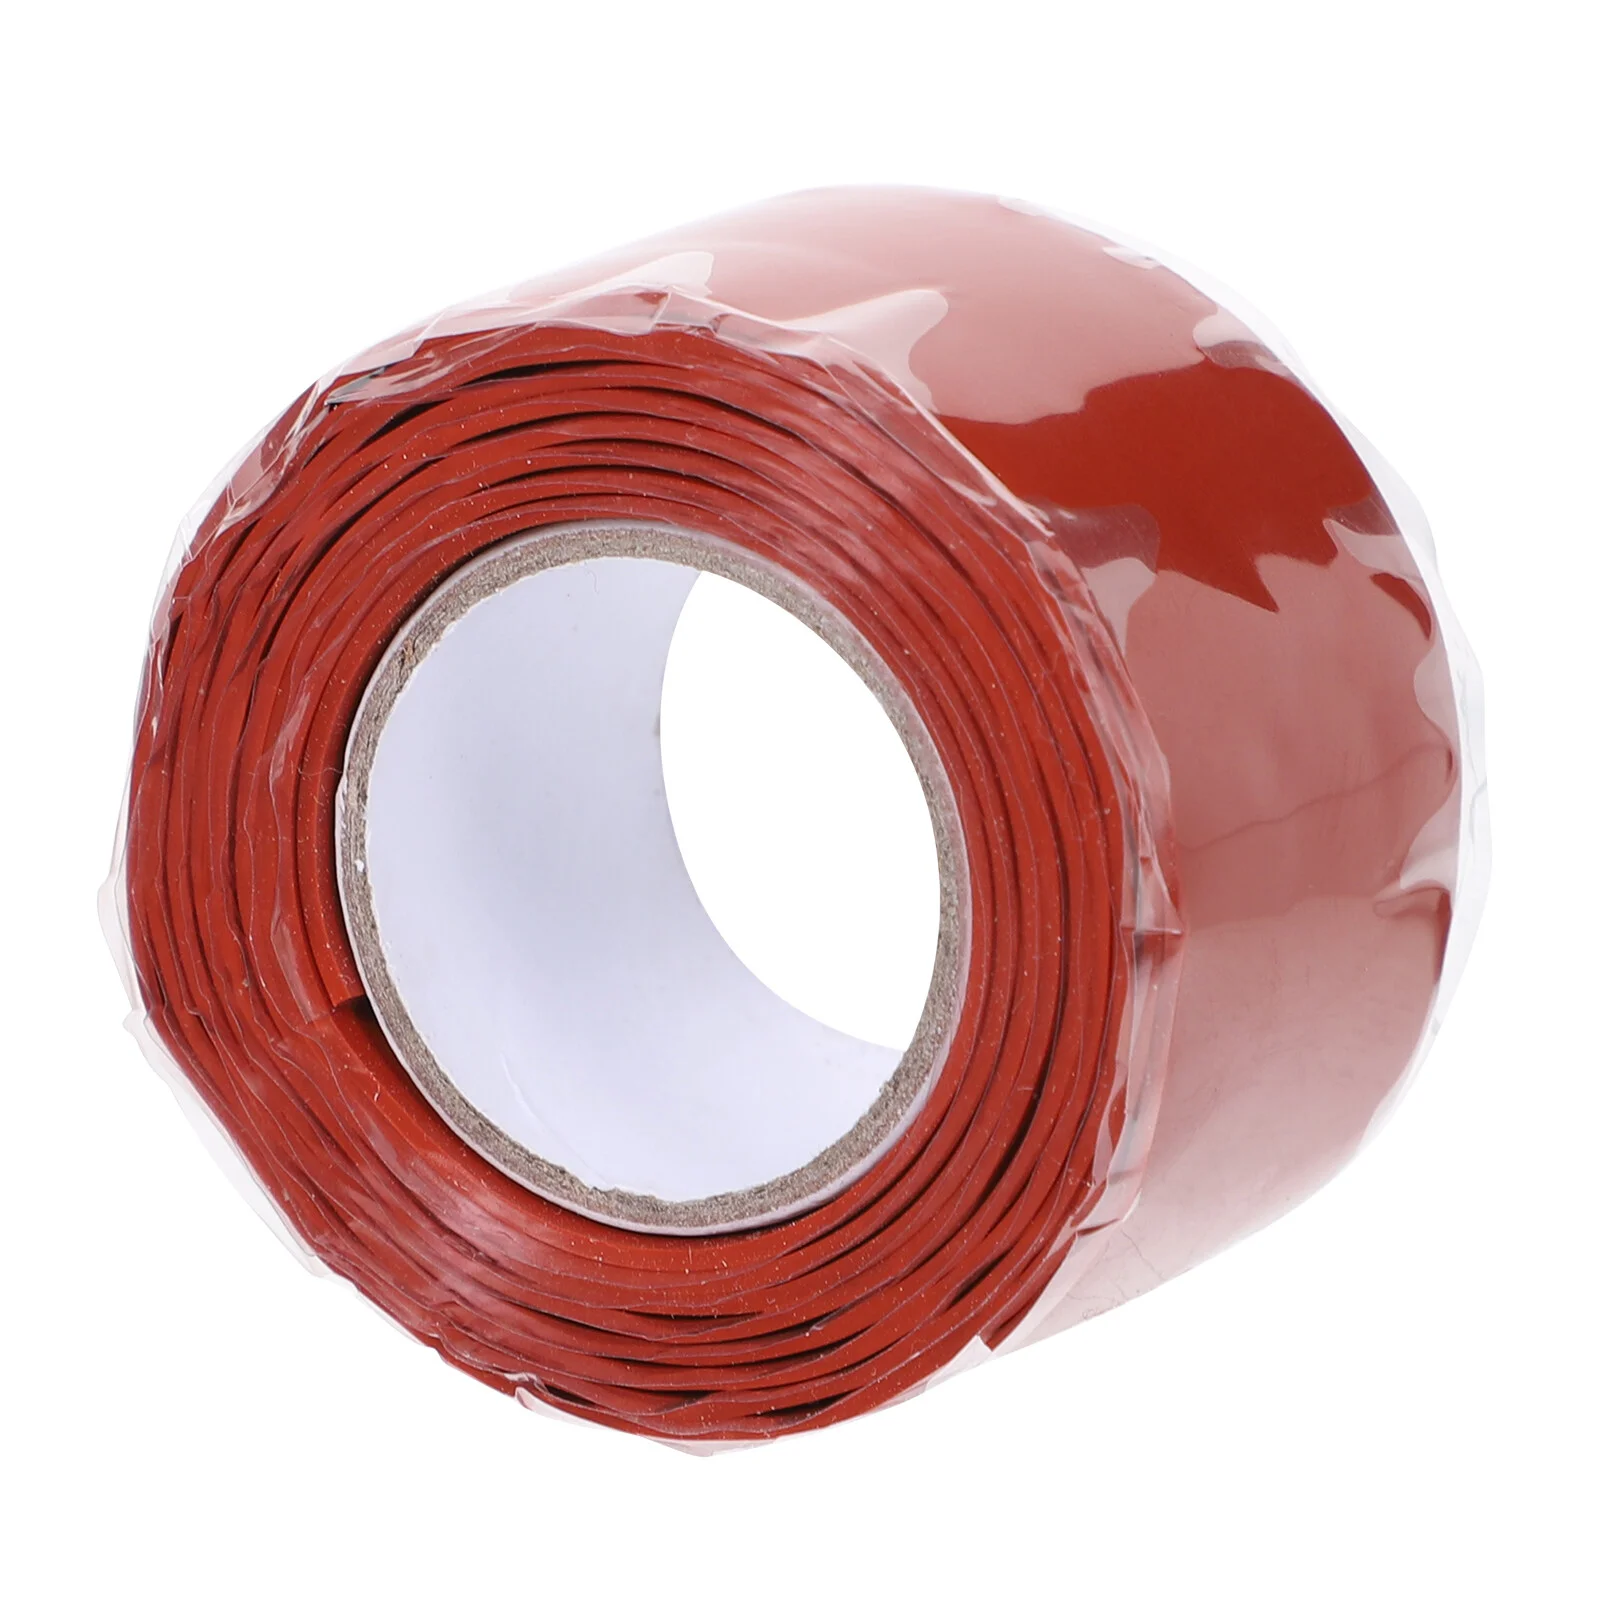 

Suite Plumbers Tape Leaky Pipes Sealing White Gaffer Seam Outdoor Waterproof Sealant Repair Silicone Rubber Duct Use